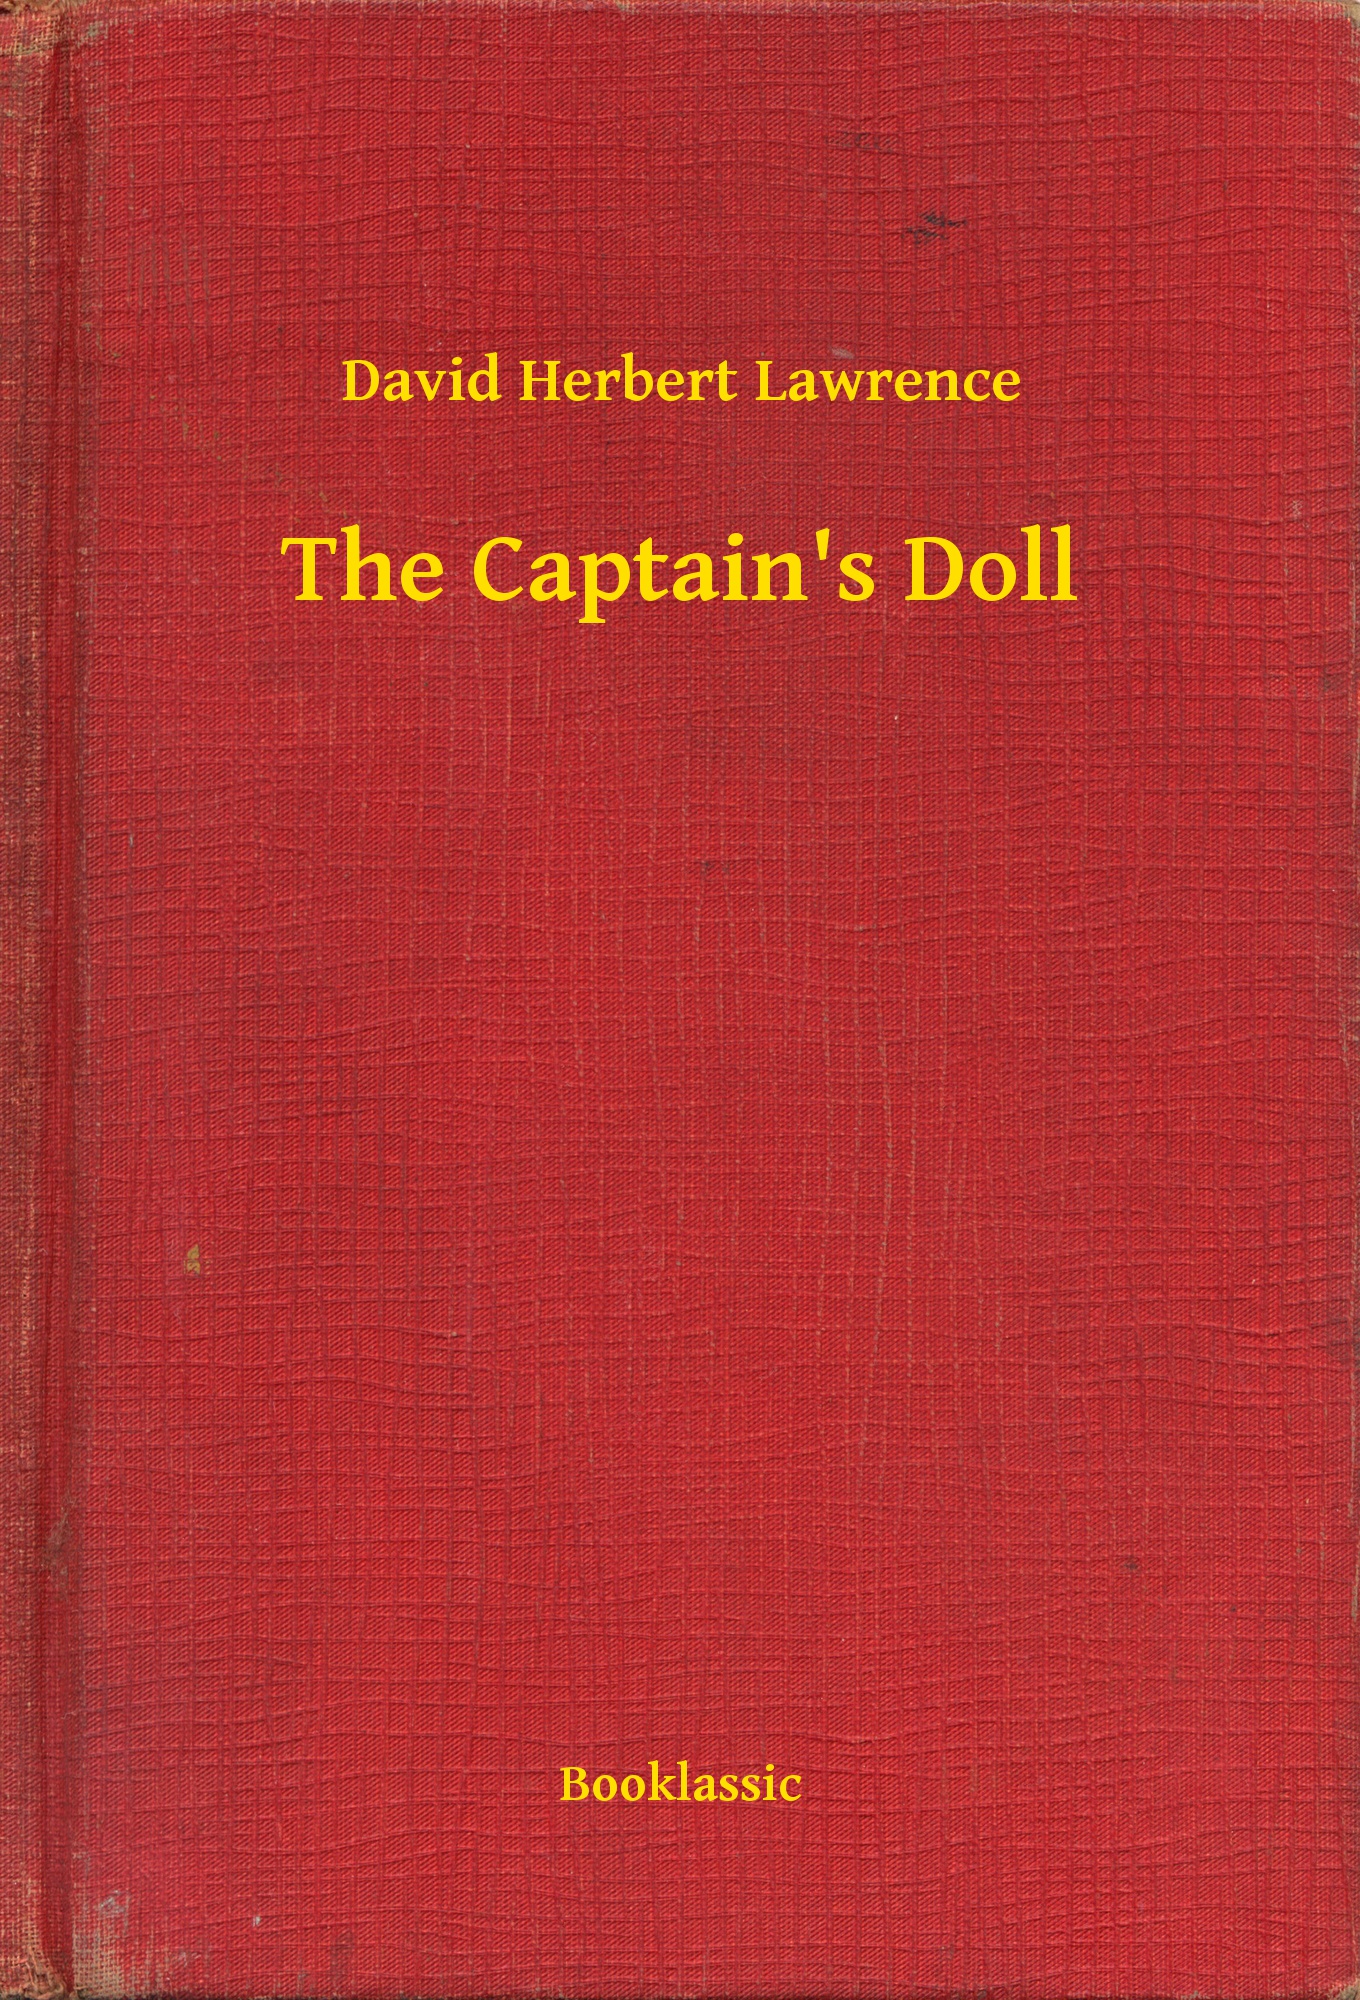 The Captain"s Doll